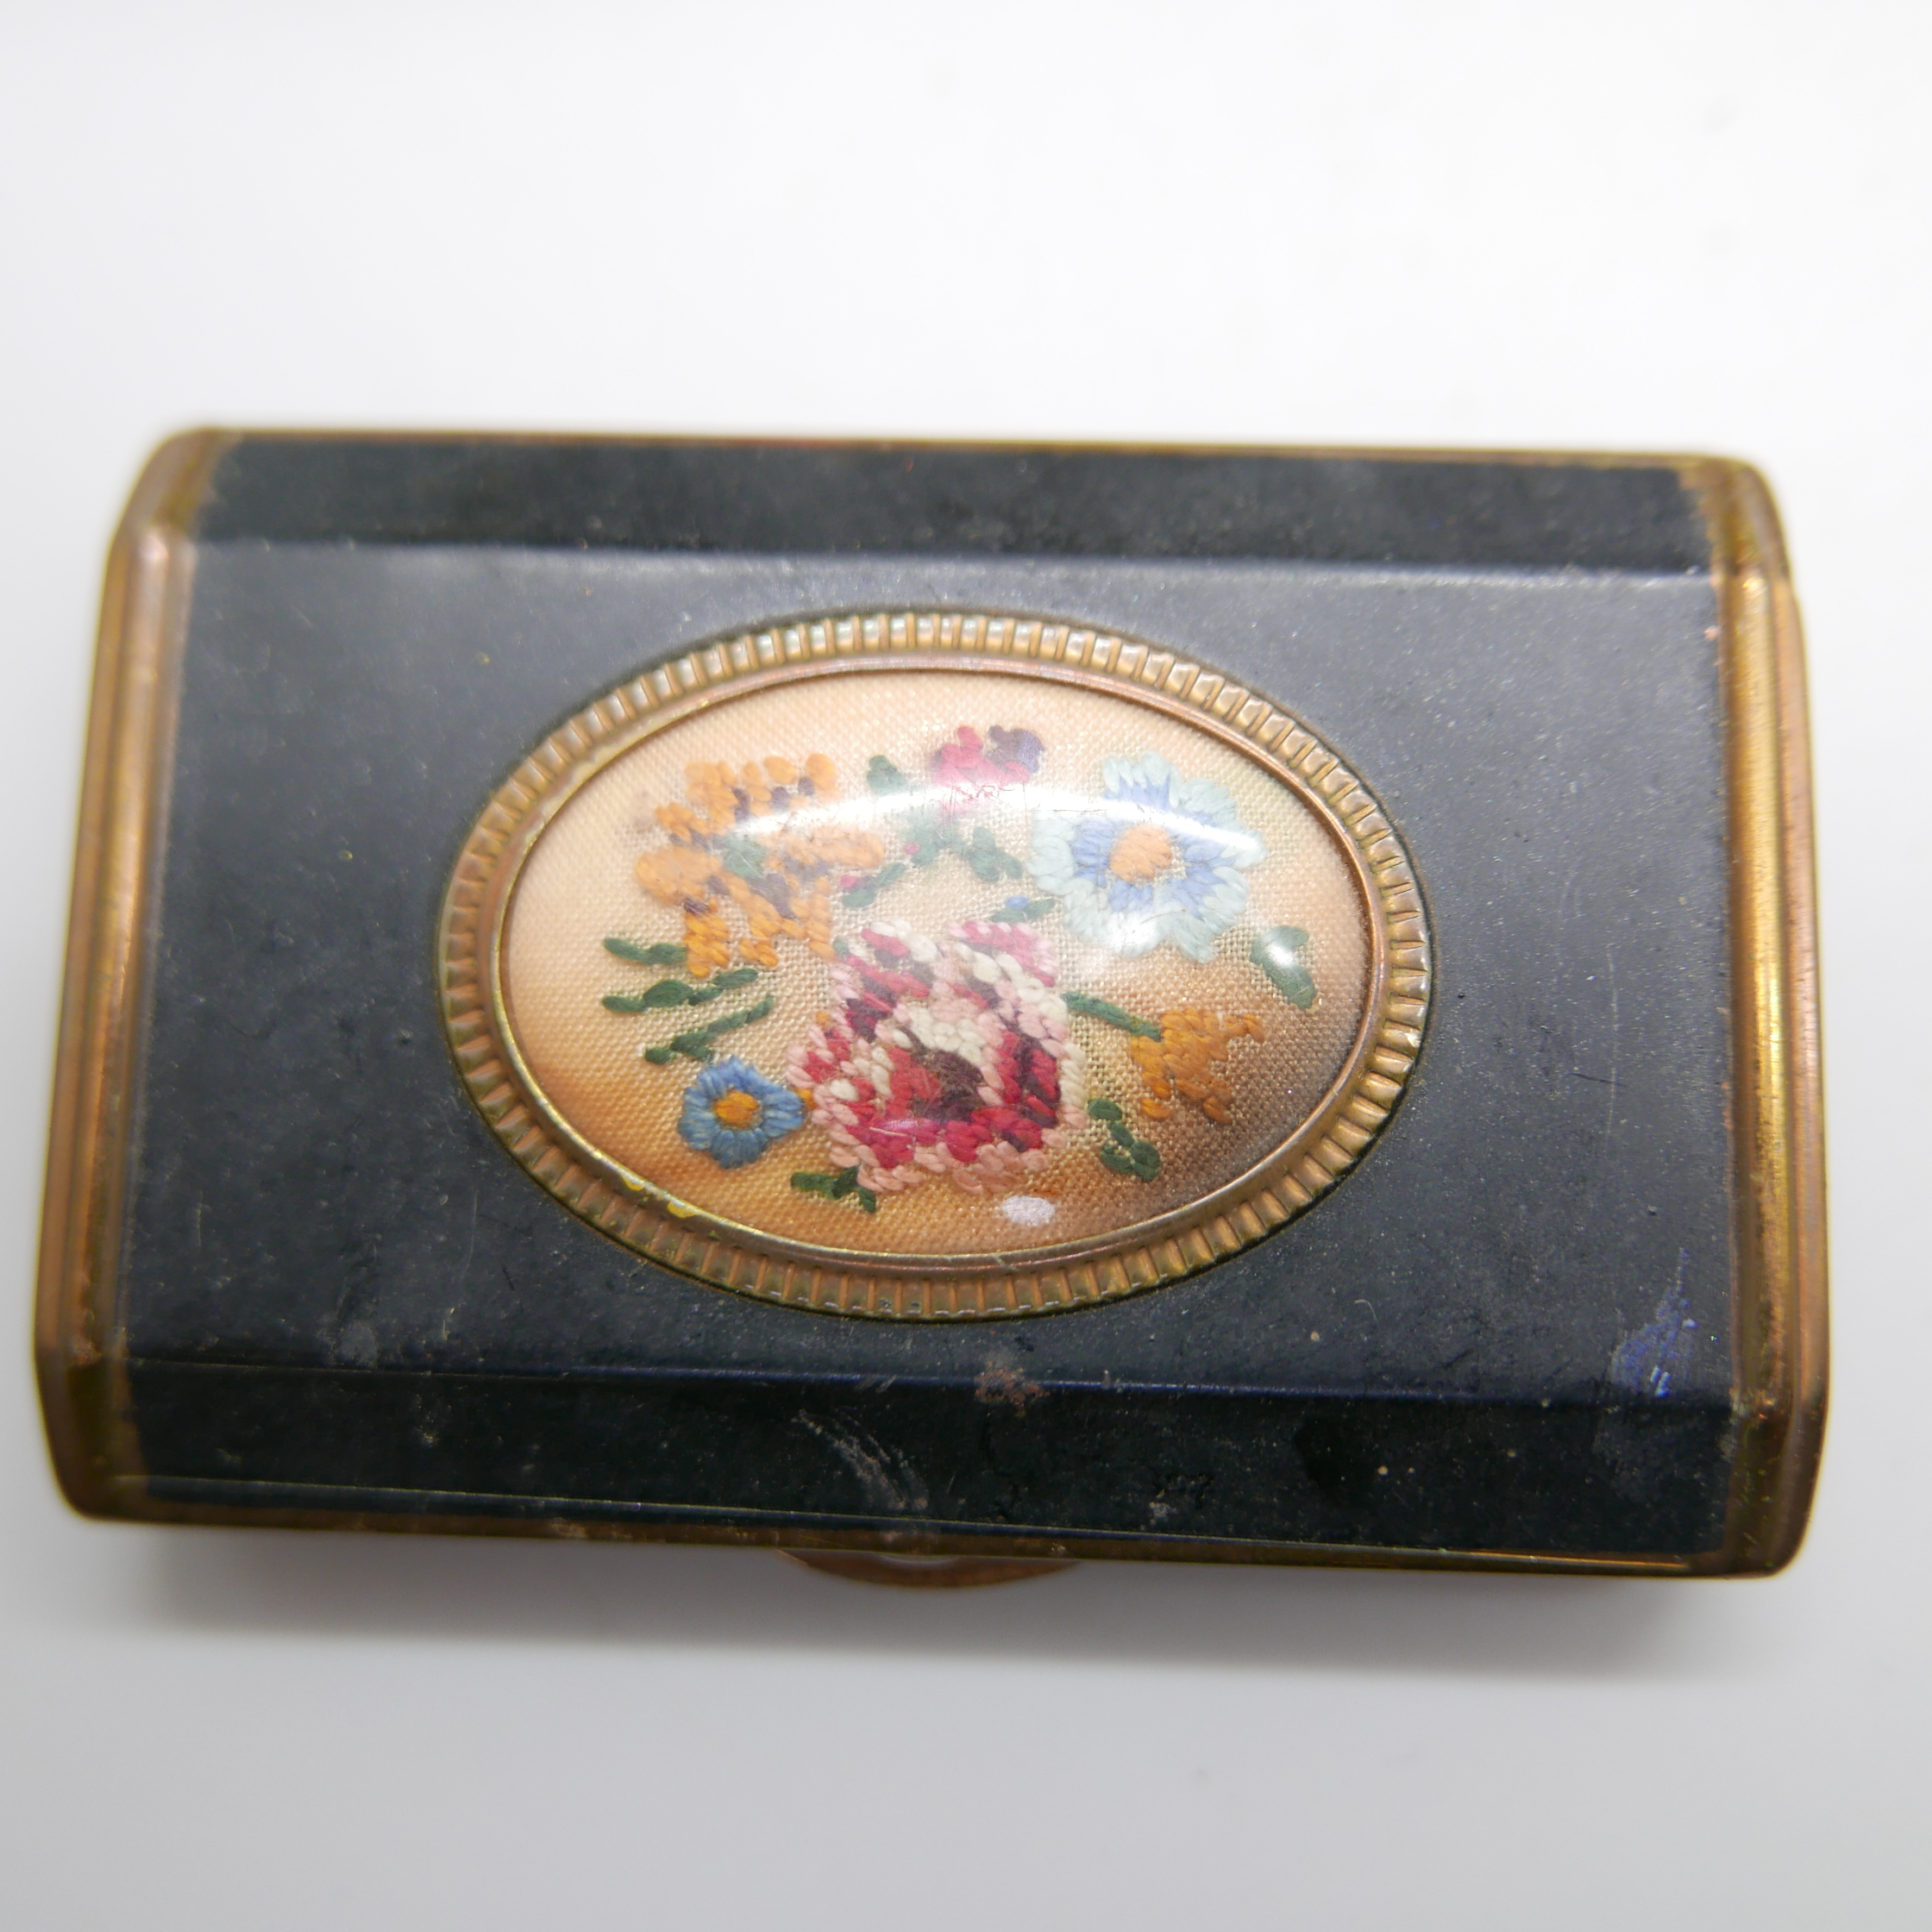 Two compacts, a watch case, etc. - Image 2 of 3